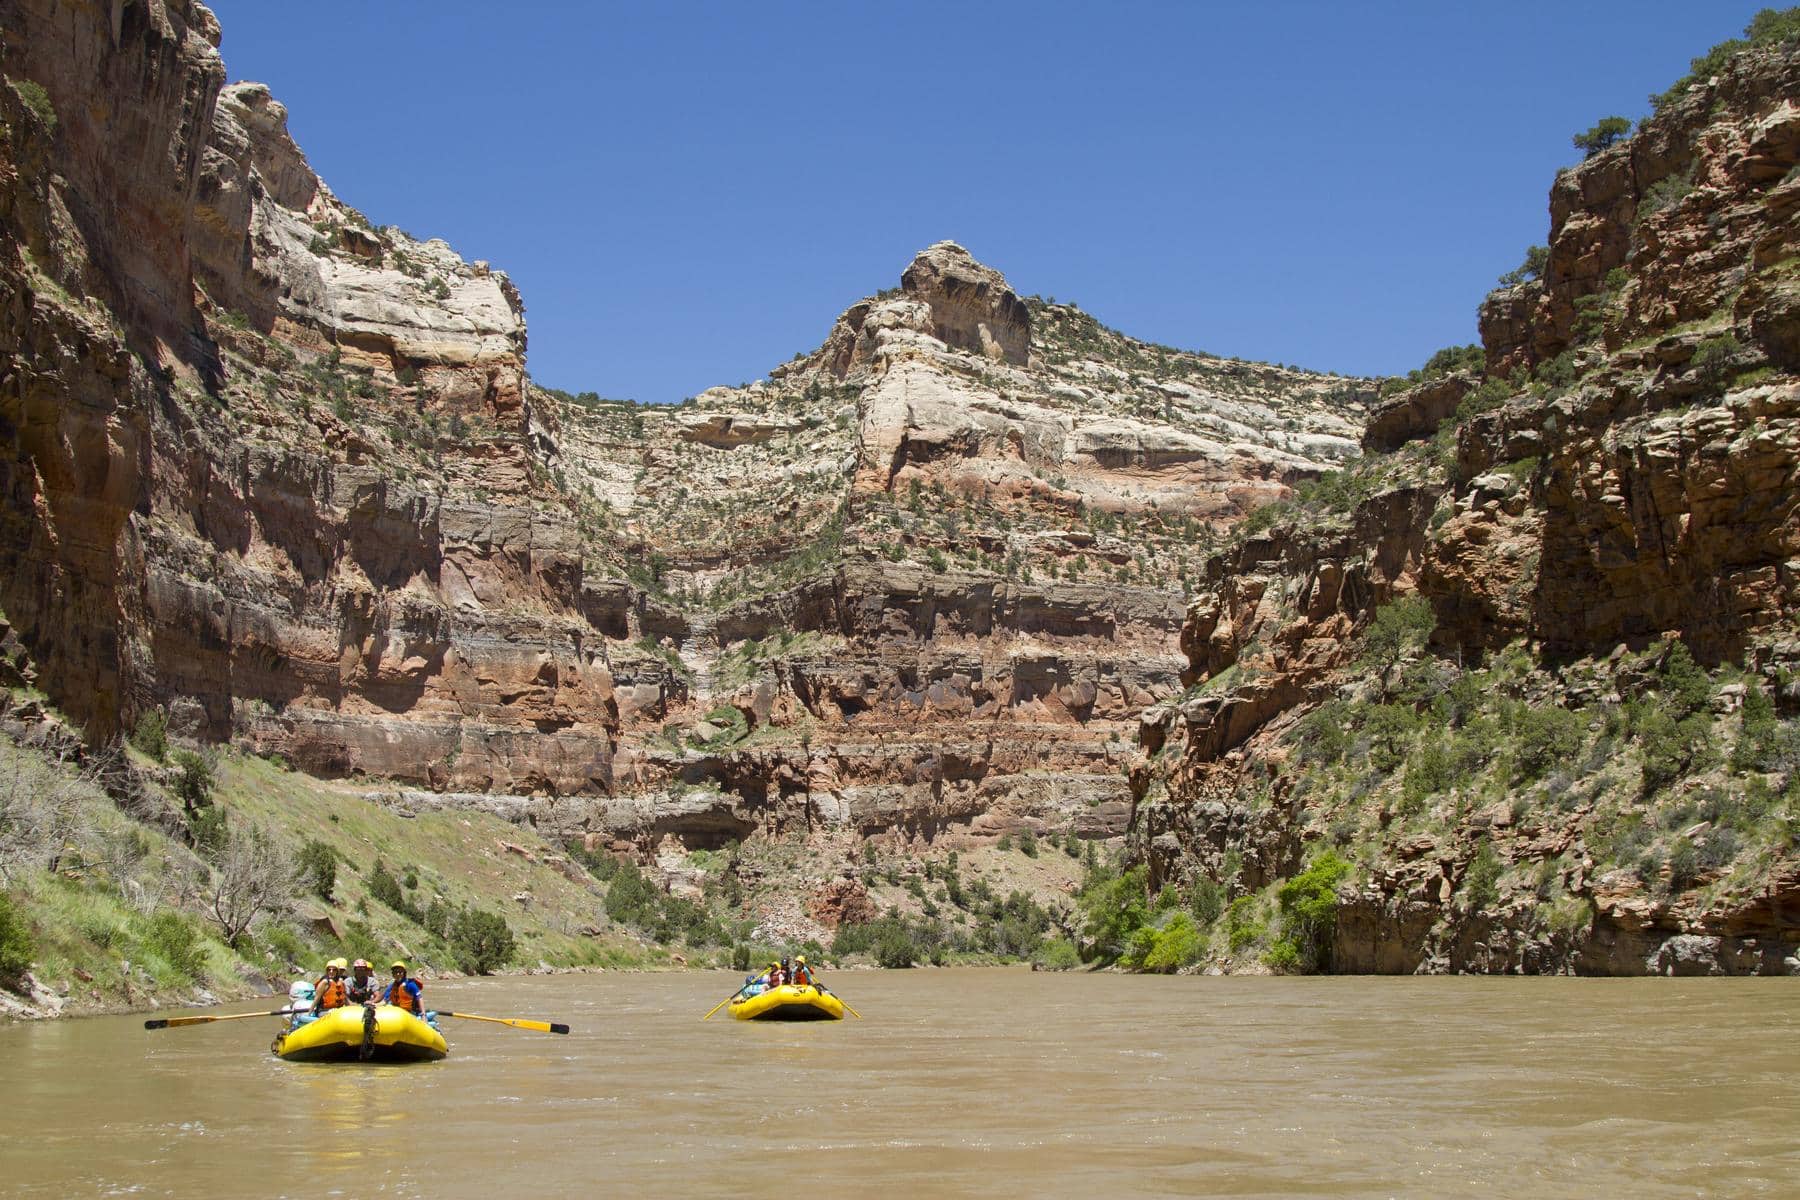 Two yellow OARS rafts full of people float down the Yampa River through a deep canyon in Dinosaur National Monument, Utah.